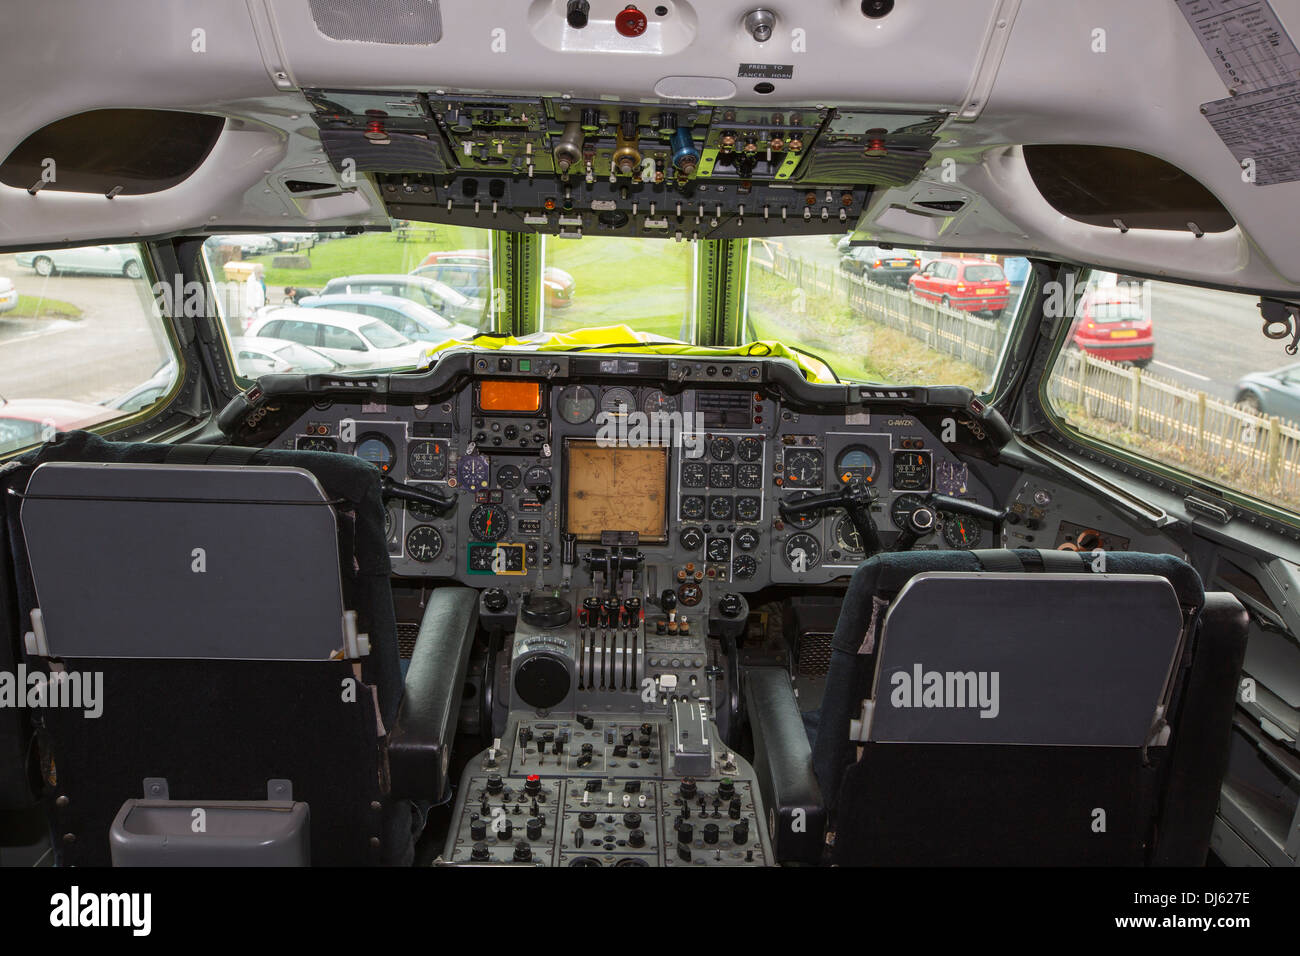 The flight deck in the cabin of an old Trident airplane at Manchester airport, UK. Stock Photo